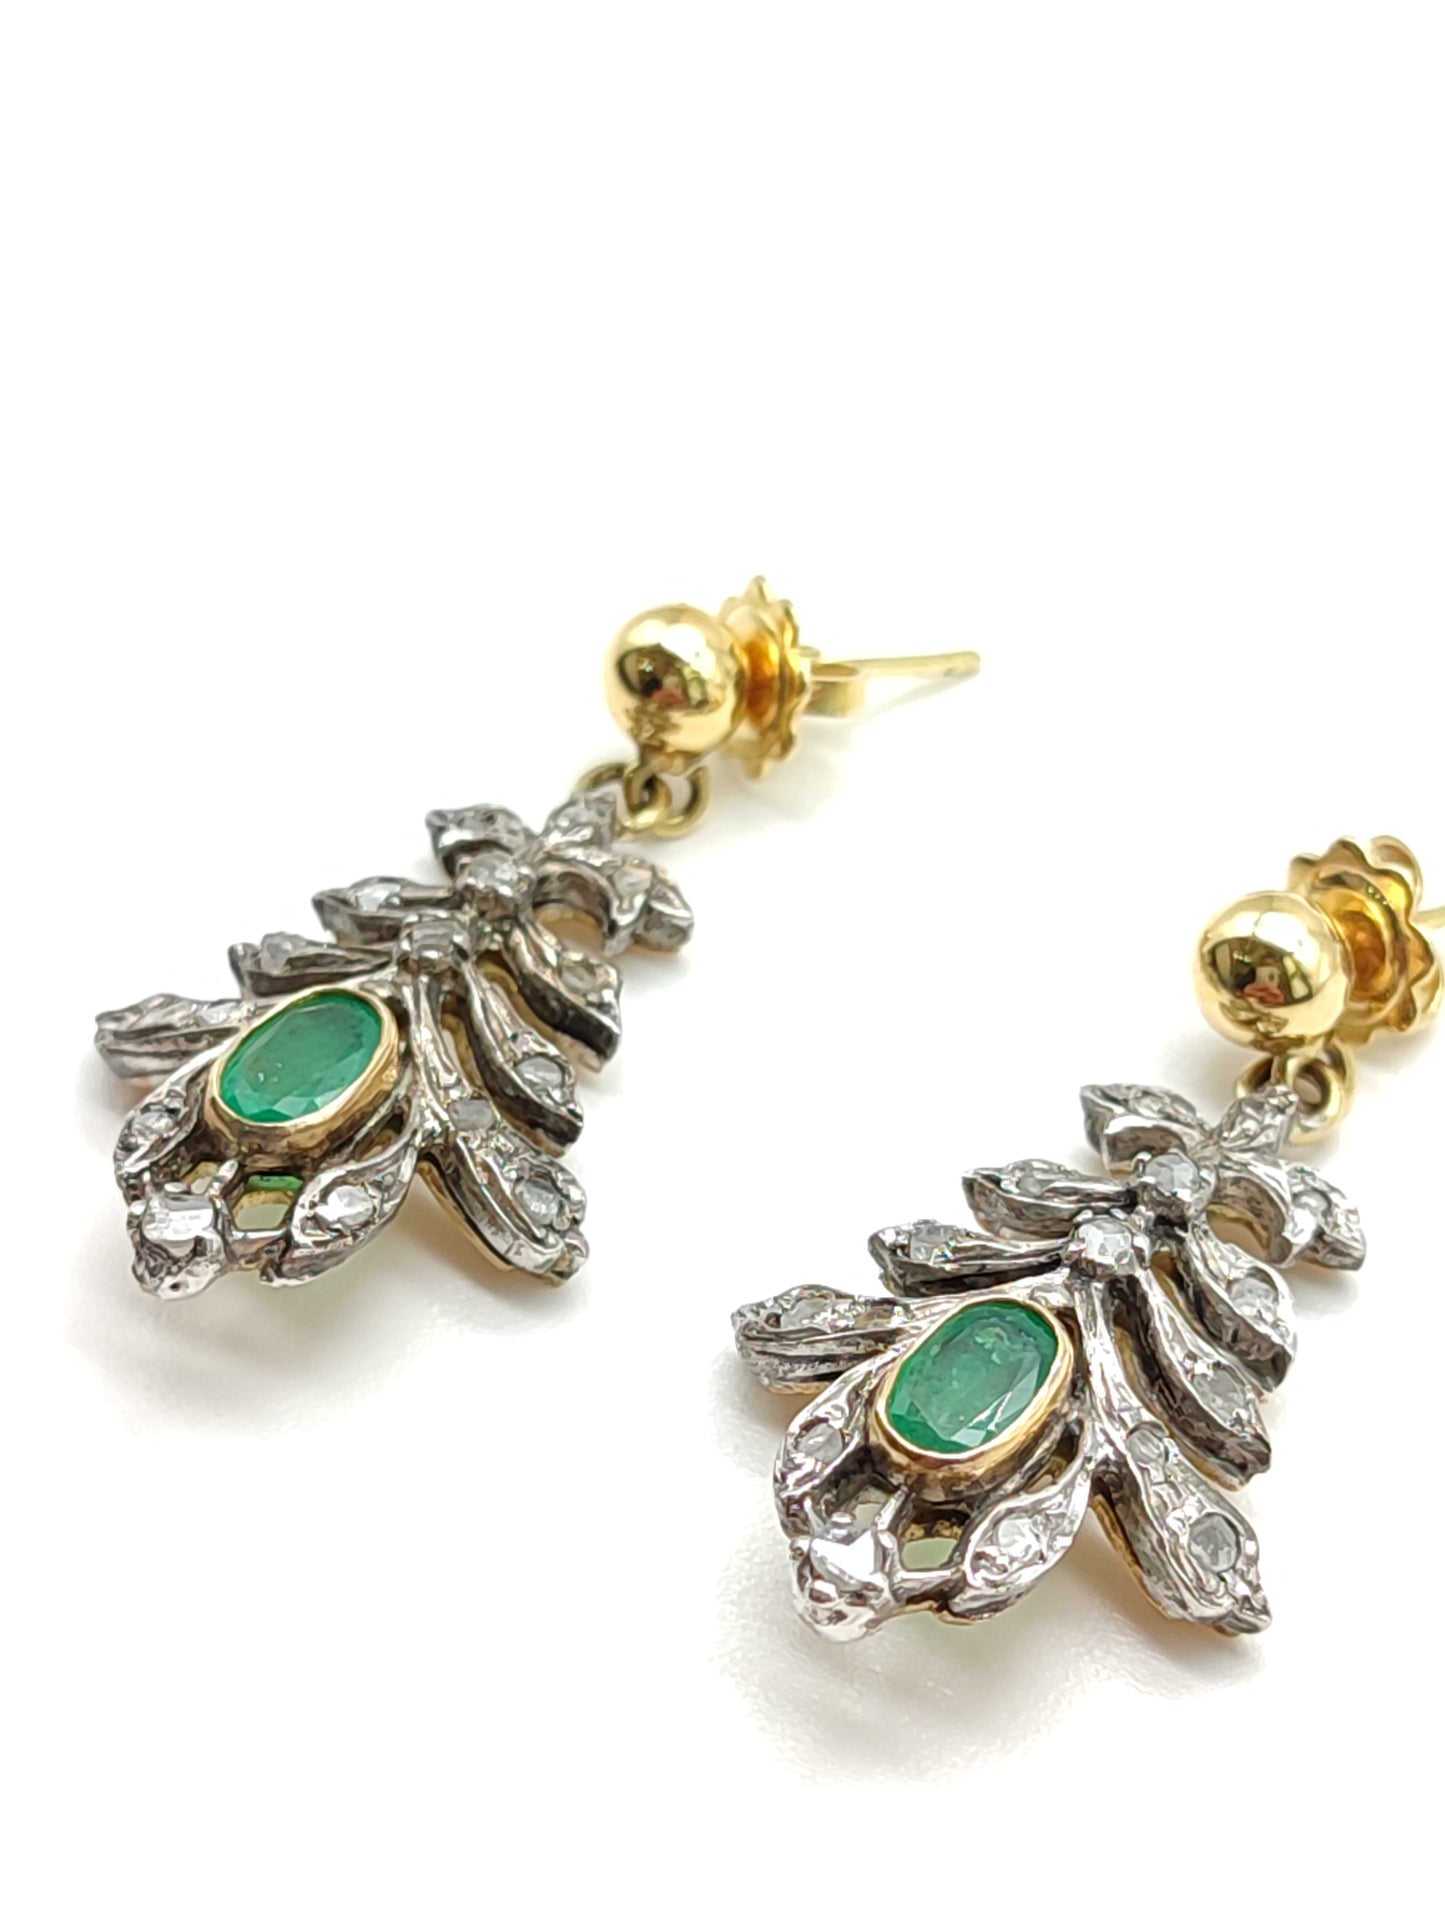 Silver and gold earrings with diamonds and emeralds